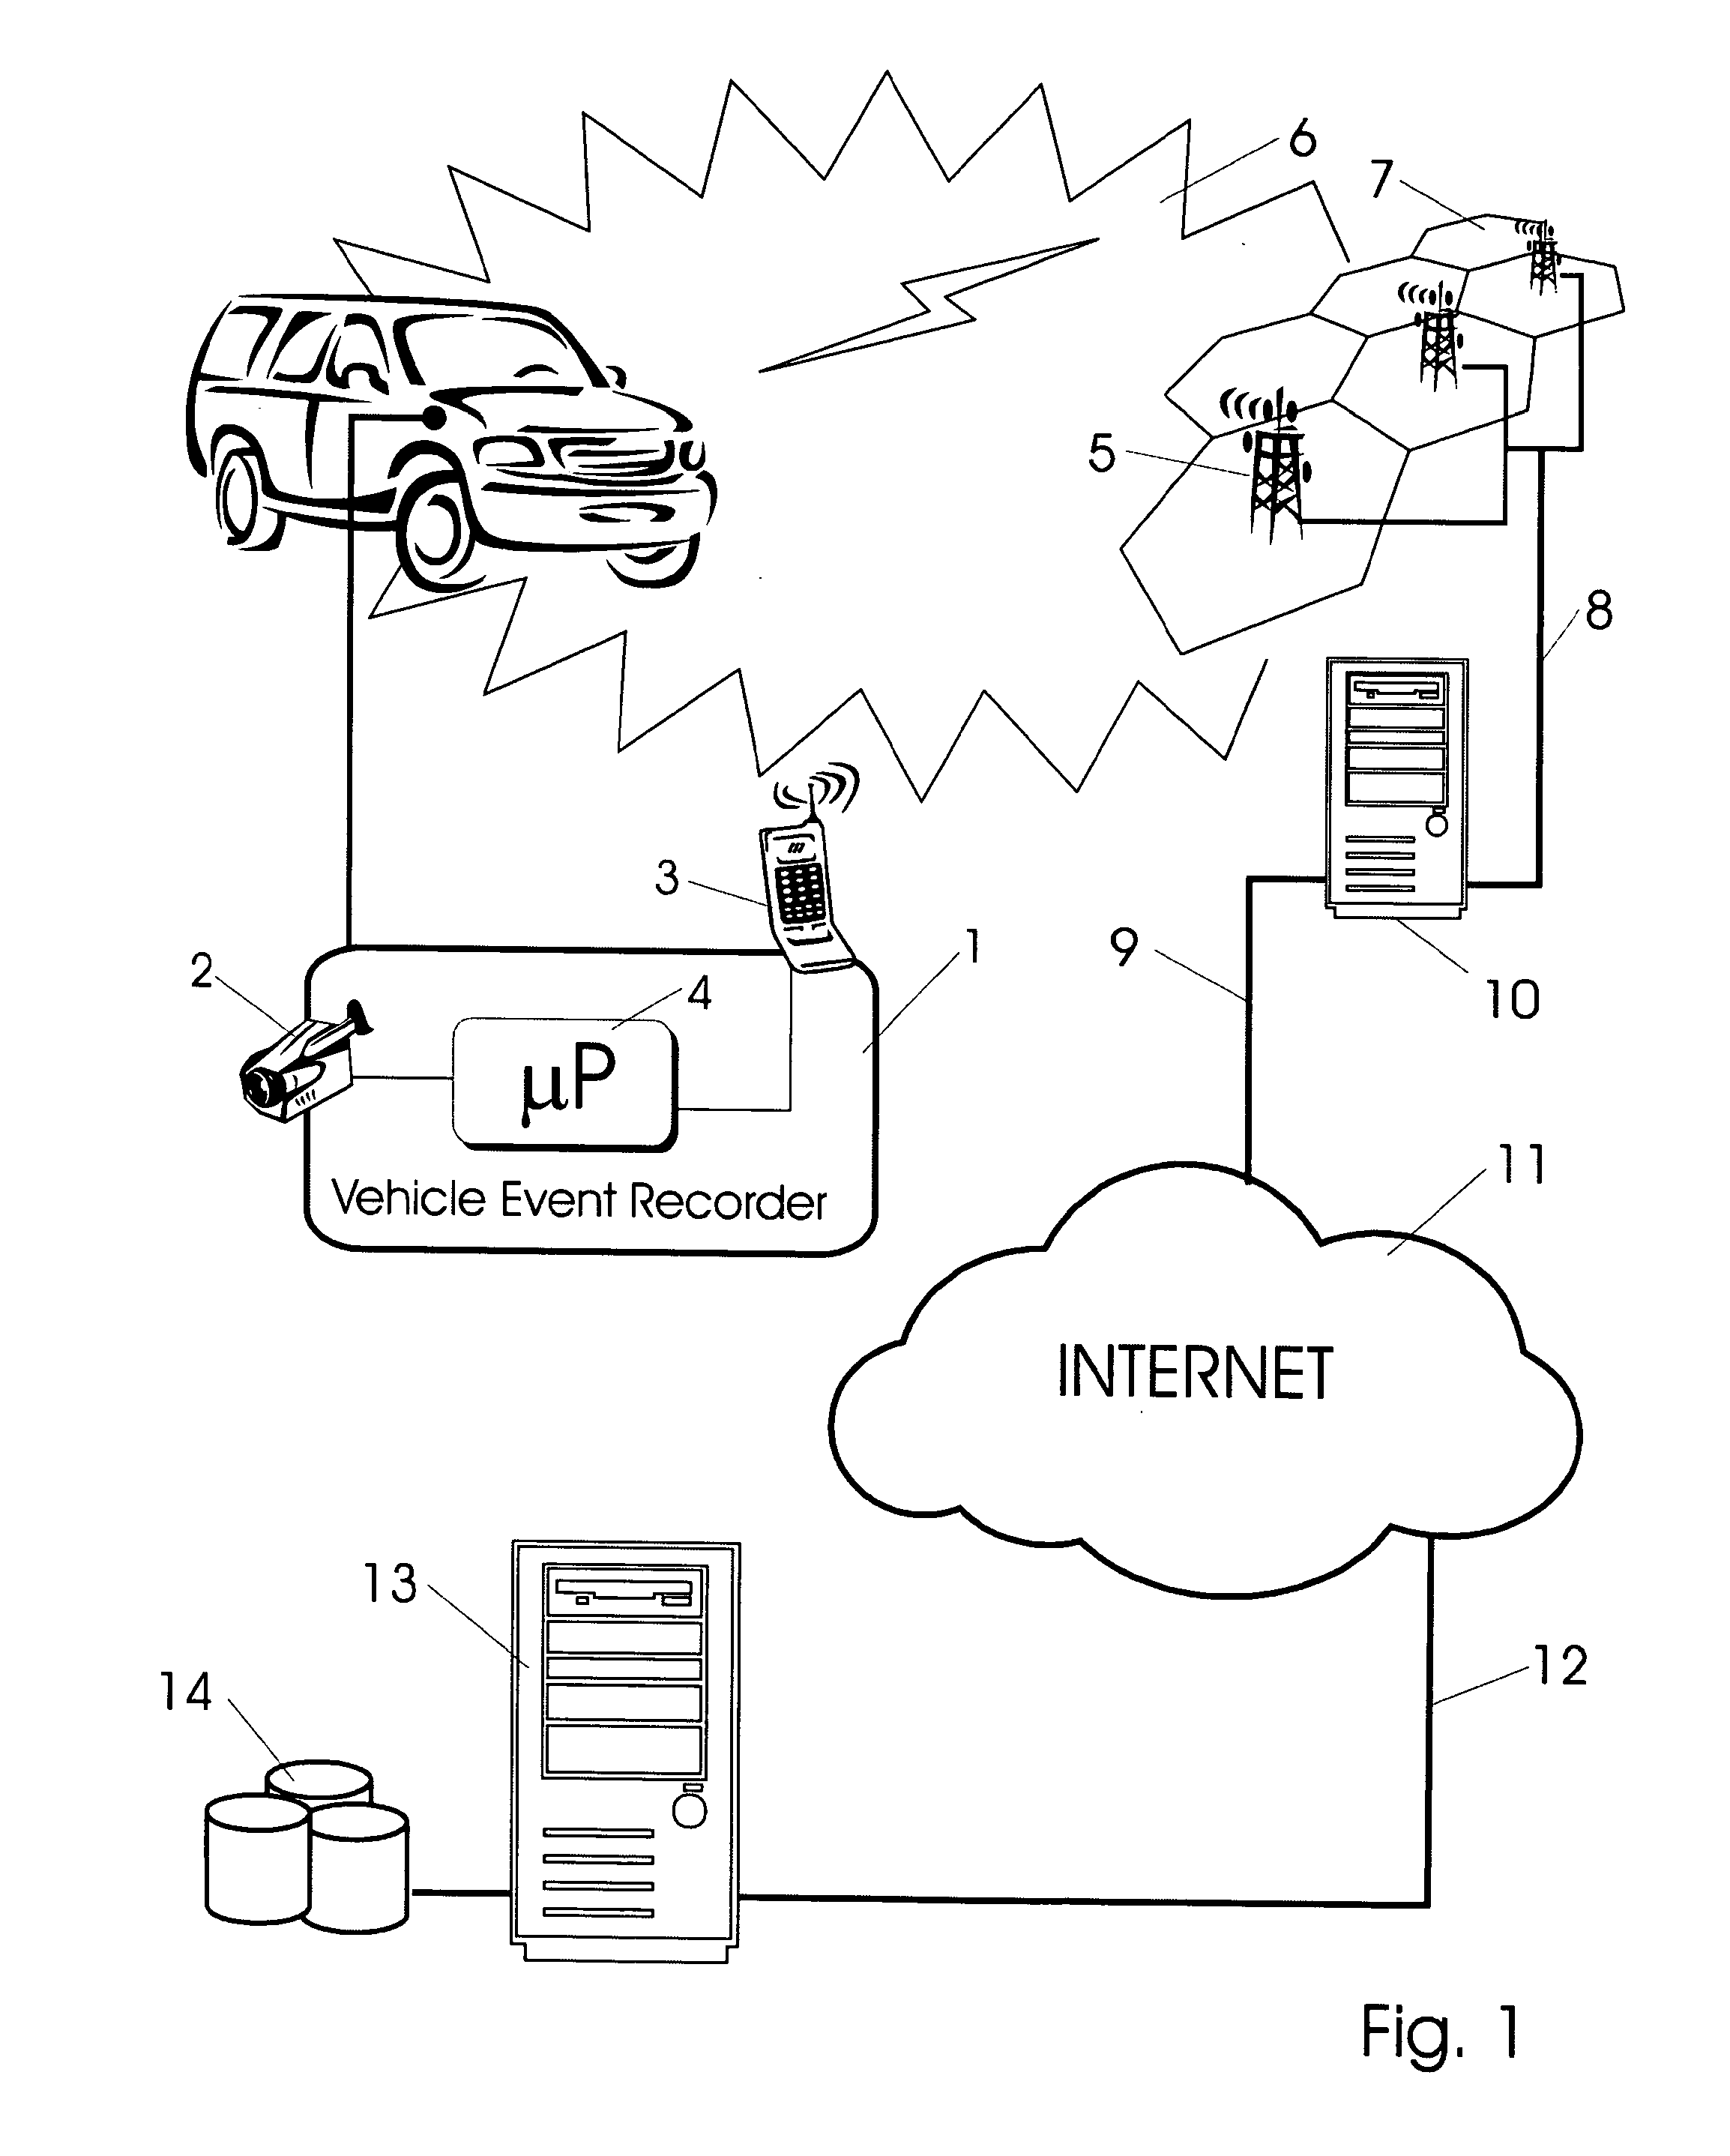 Vehicle Event Recorder Systems and Networks Having Integrated Cellular Wireless Communications Systems